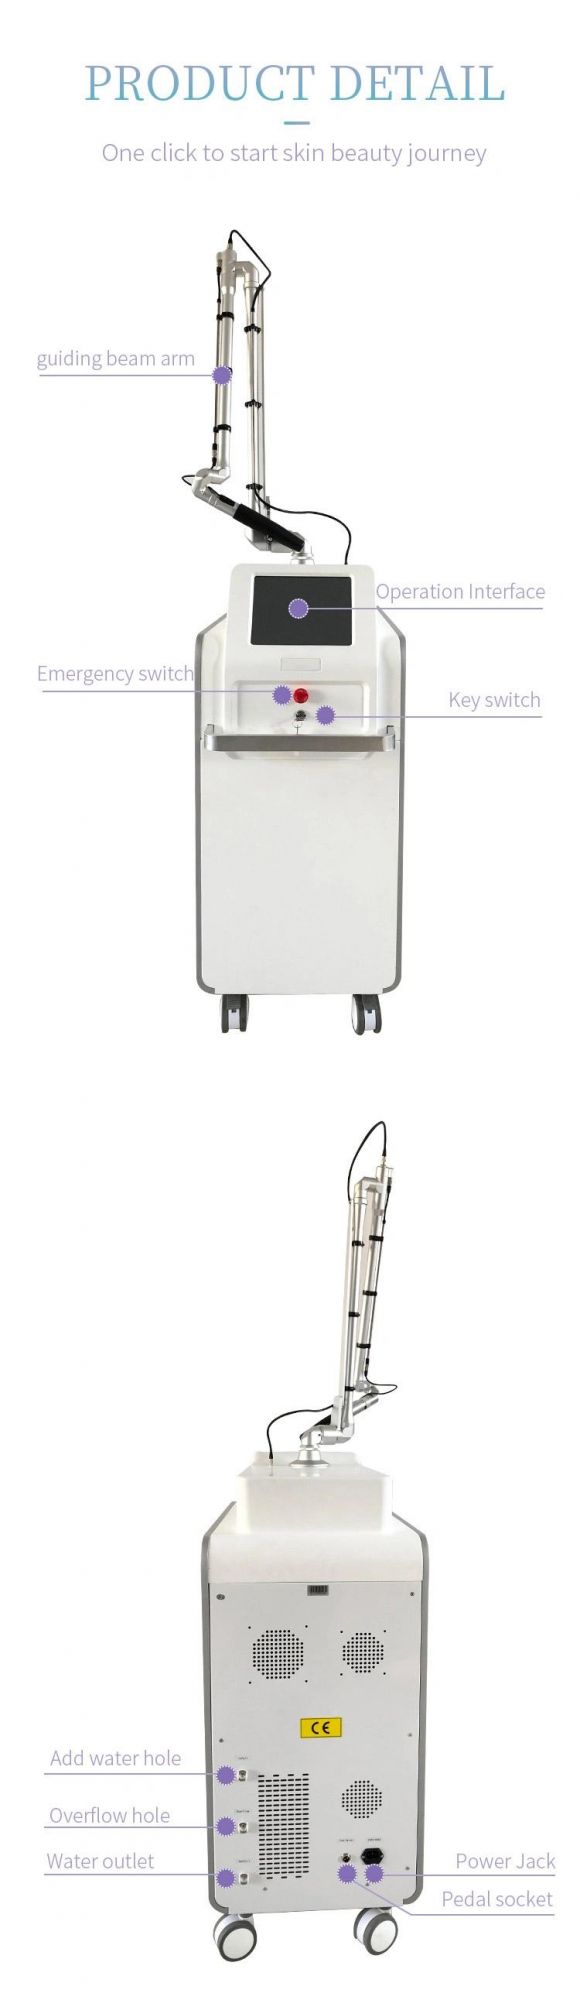 Vertical Picolaser with Korea Arm Pigment Removal Clinic Equipment